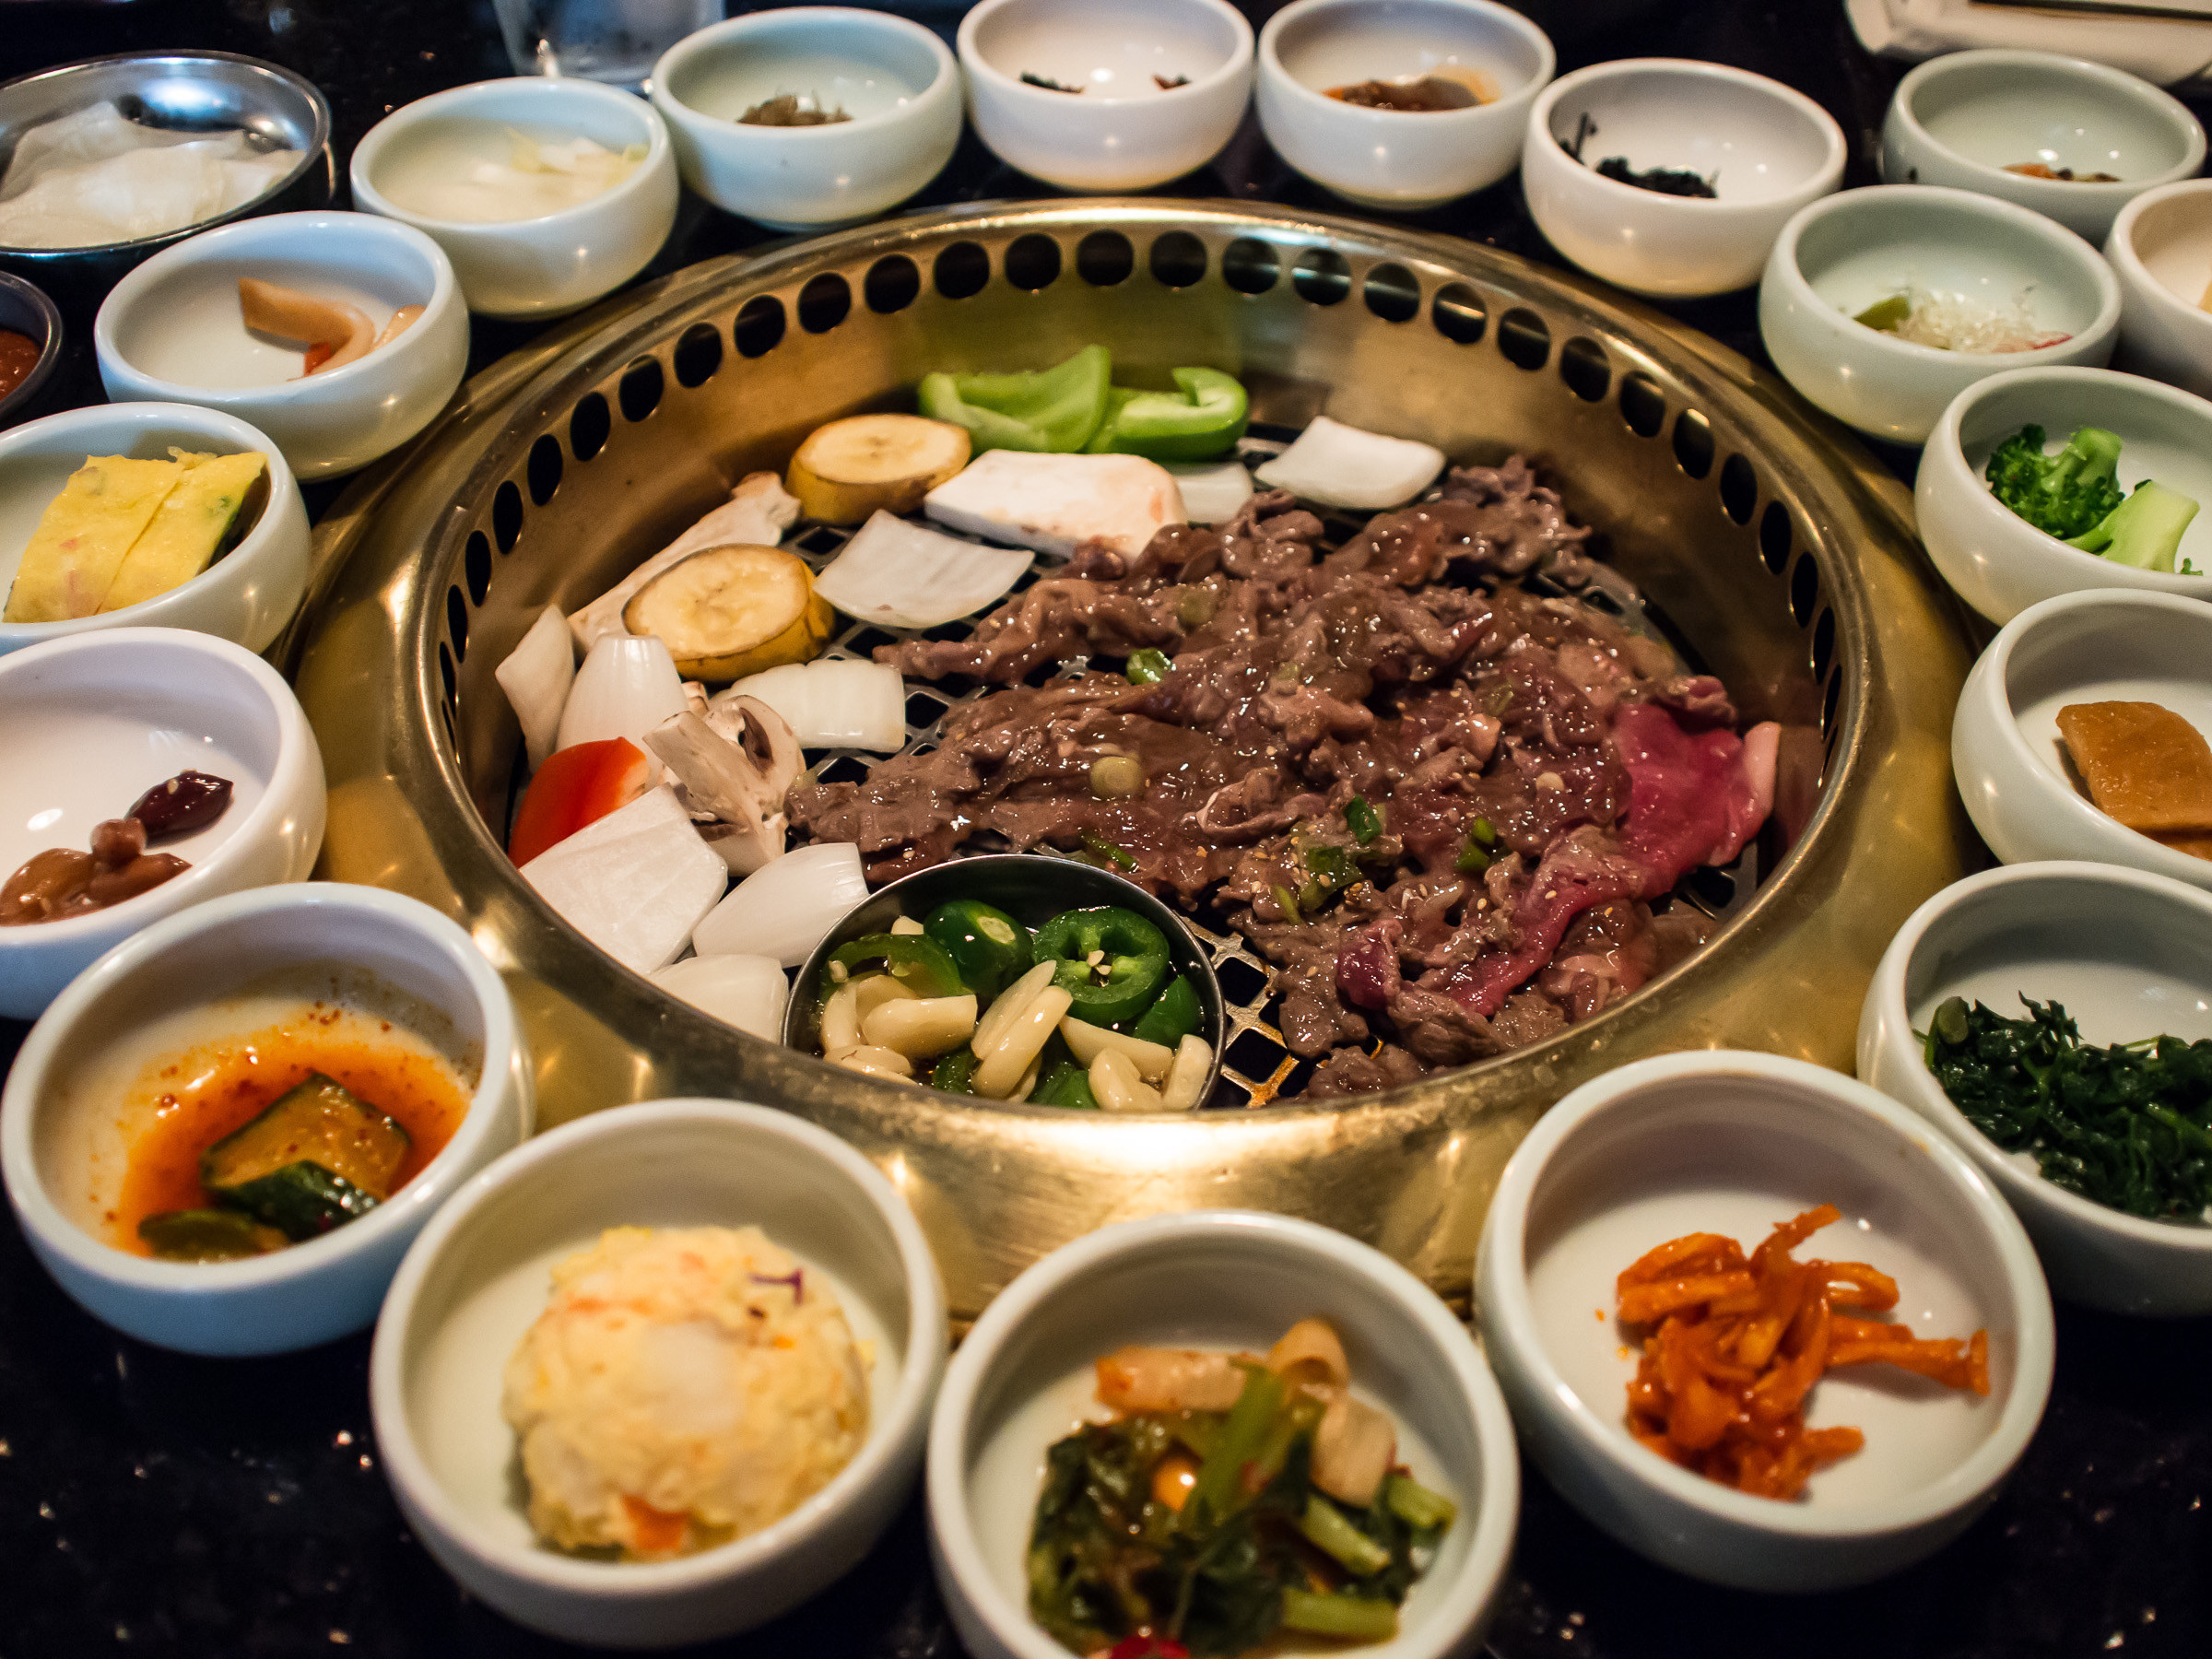 Korean barbecue with lots of banchan side dishes.